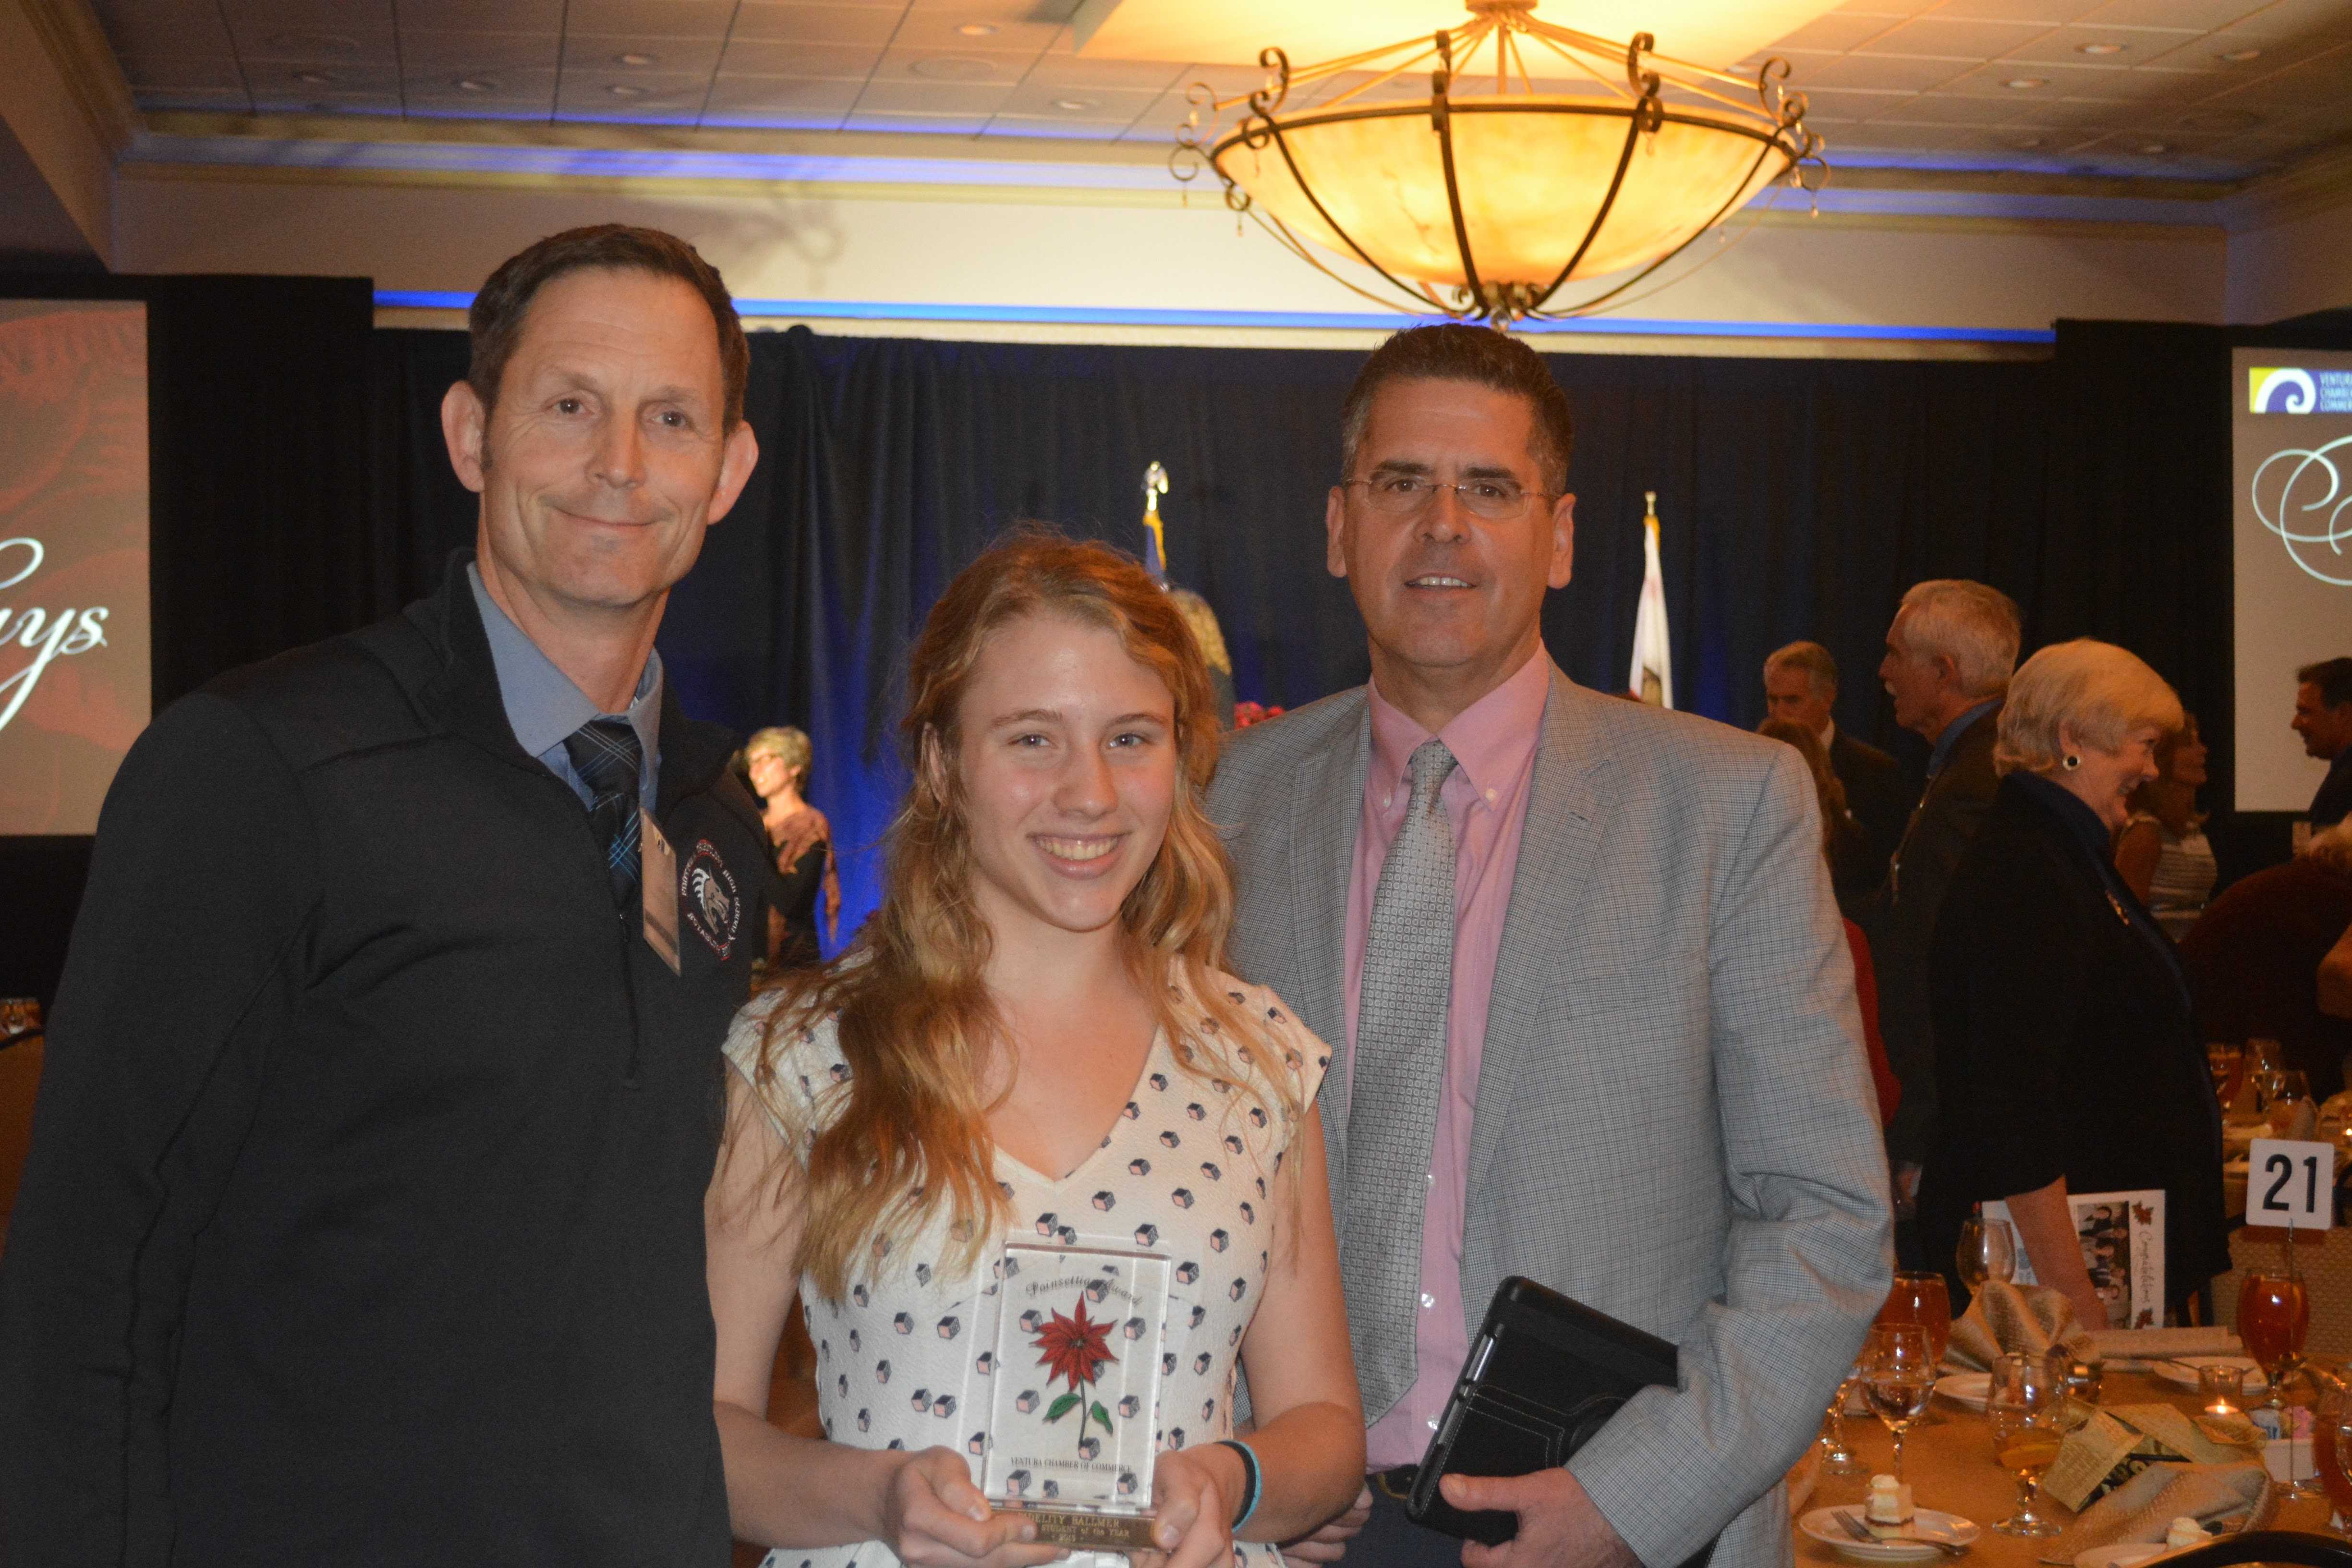 Foothill Technology High School Principal Joe Bova and Ventura Unified School District Superintendent Dr. Michael Babb pose with Female Student of the Year Award winner Fidelity Ballmer. Credit: Bella Bobrow/The Foothill Dragon Press.